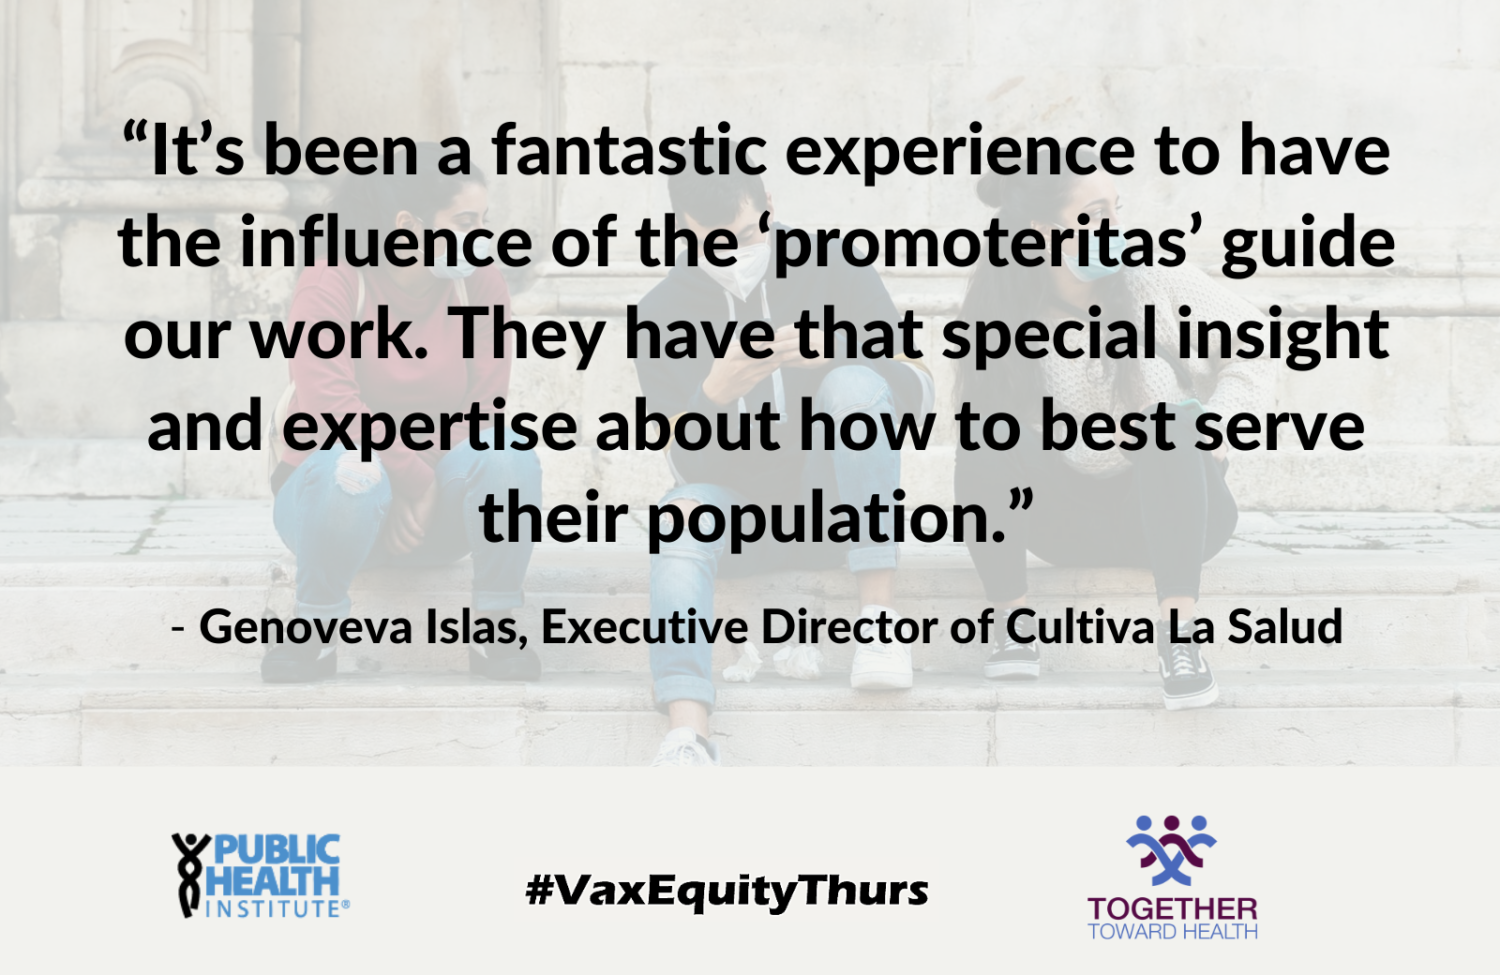 “It’s been a fantastic experience to have the influence of the ‘promoteritas’ guide our work. They have that special insight and expertise about how to best serve their population.” - Genoveva Islas, Executive Director of Cultiva La Salud